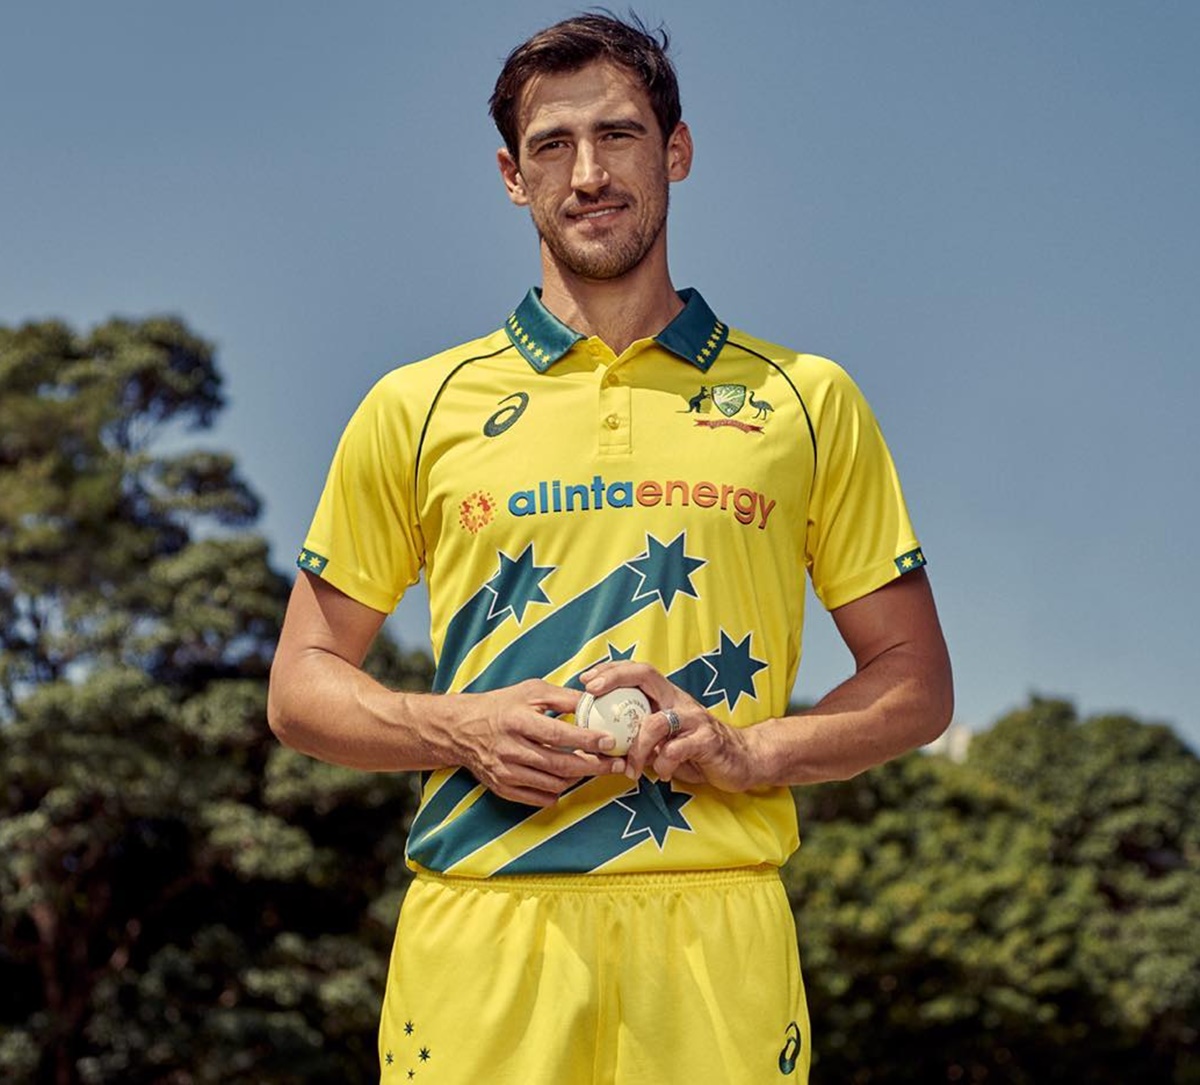 Here's why Starc opted out of IPL auction